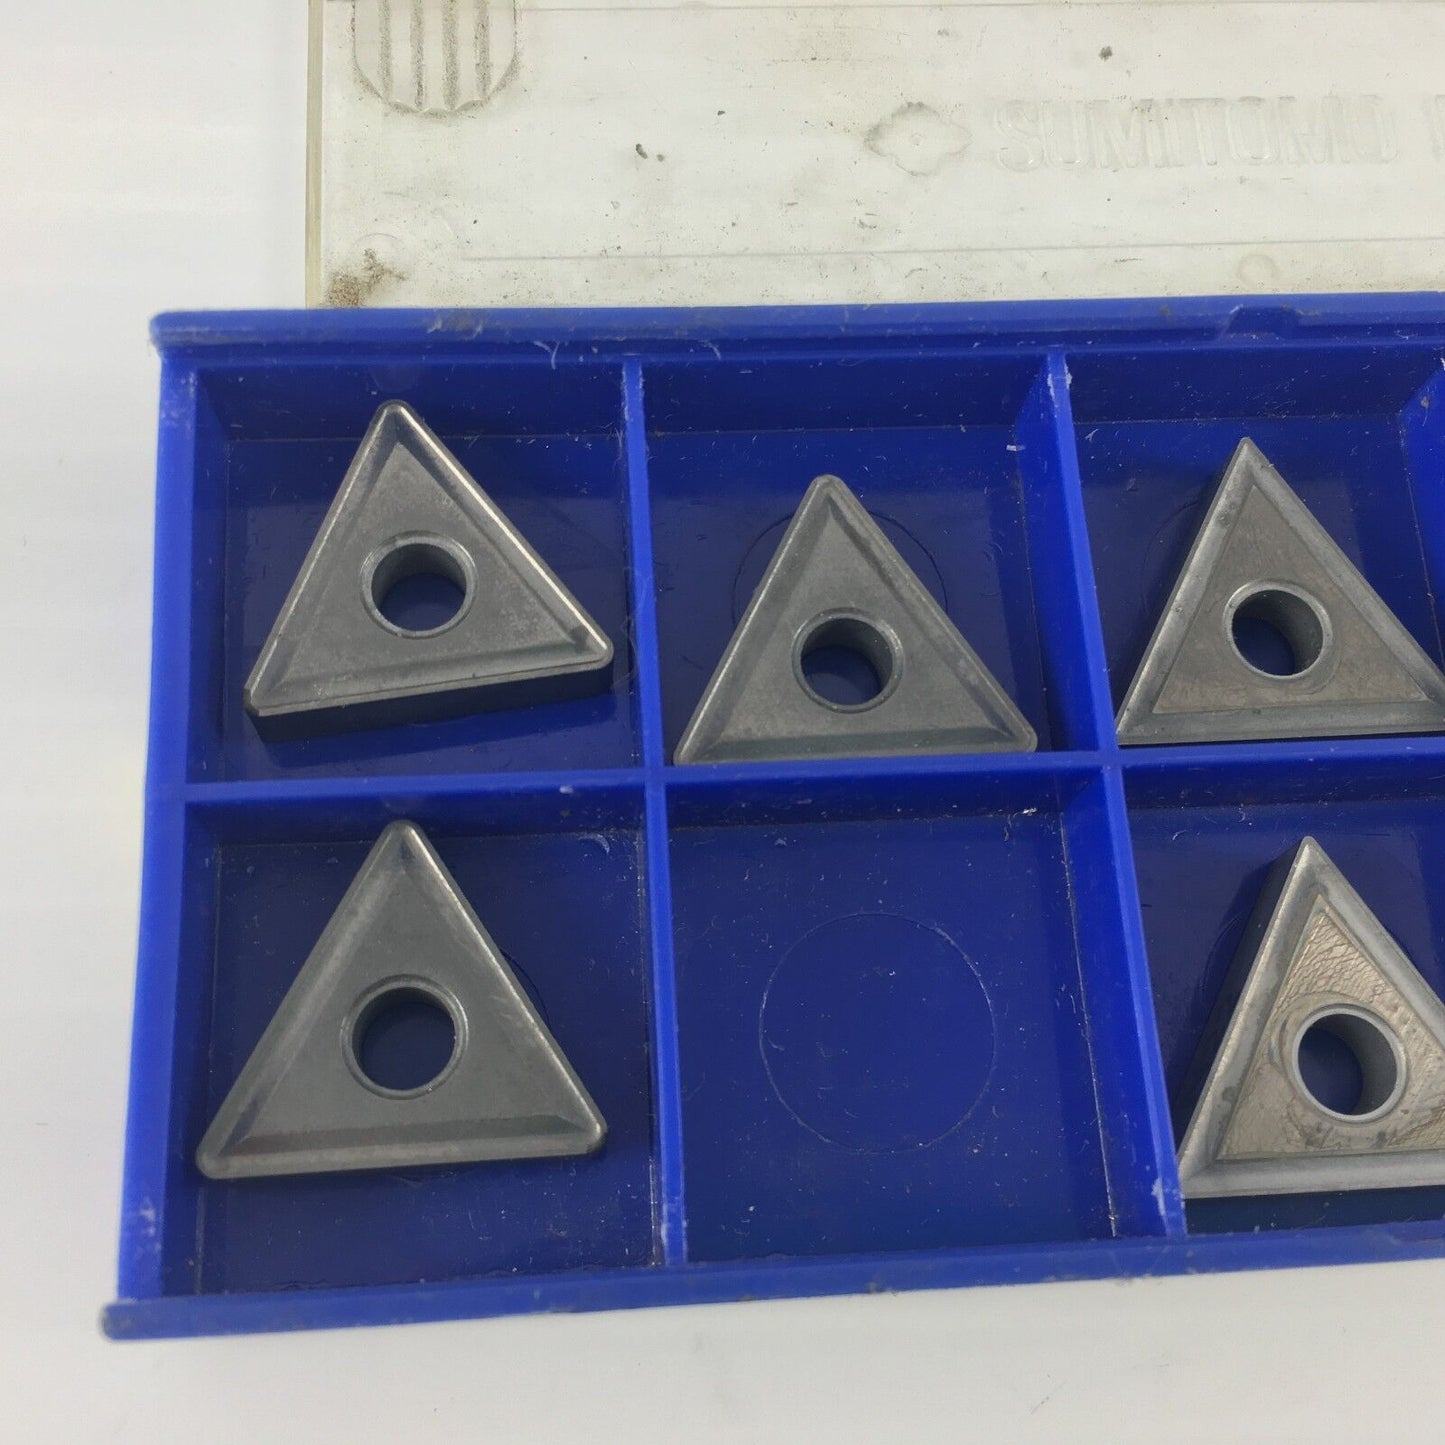 9 SUMITOMO Carbide Inserts. DNMP 432,  EH20Z, N22 + N60 Insterts